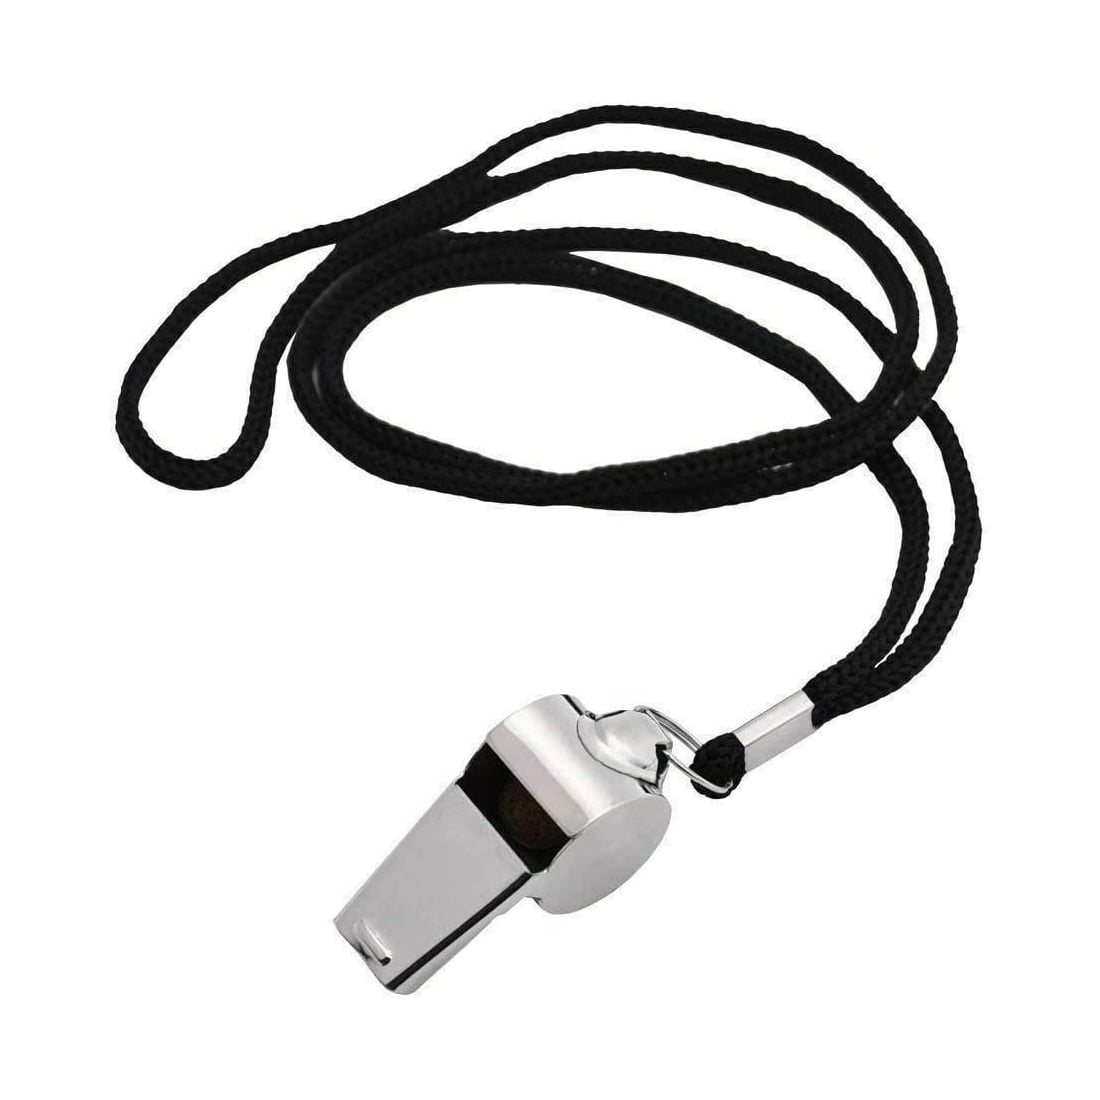 New Plastic Sports Whistle Black Official Football Referee Safety Whistle 